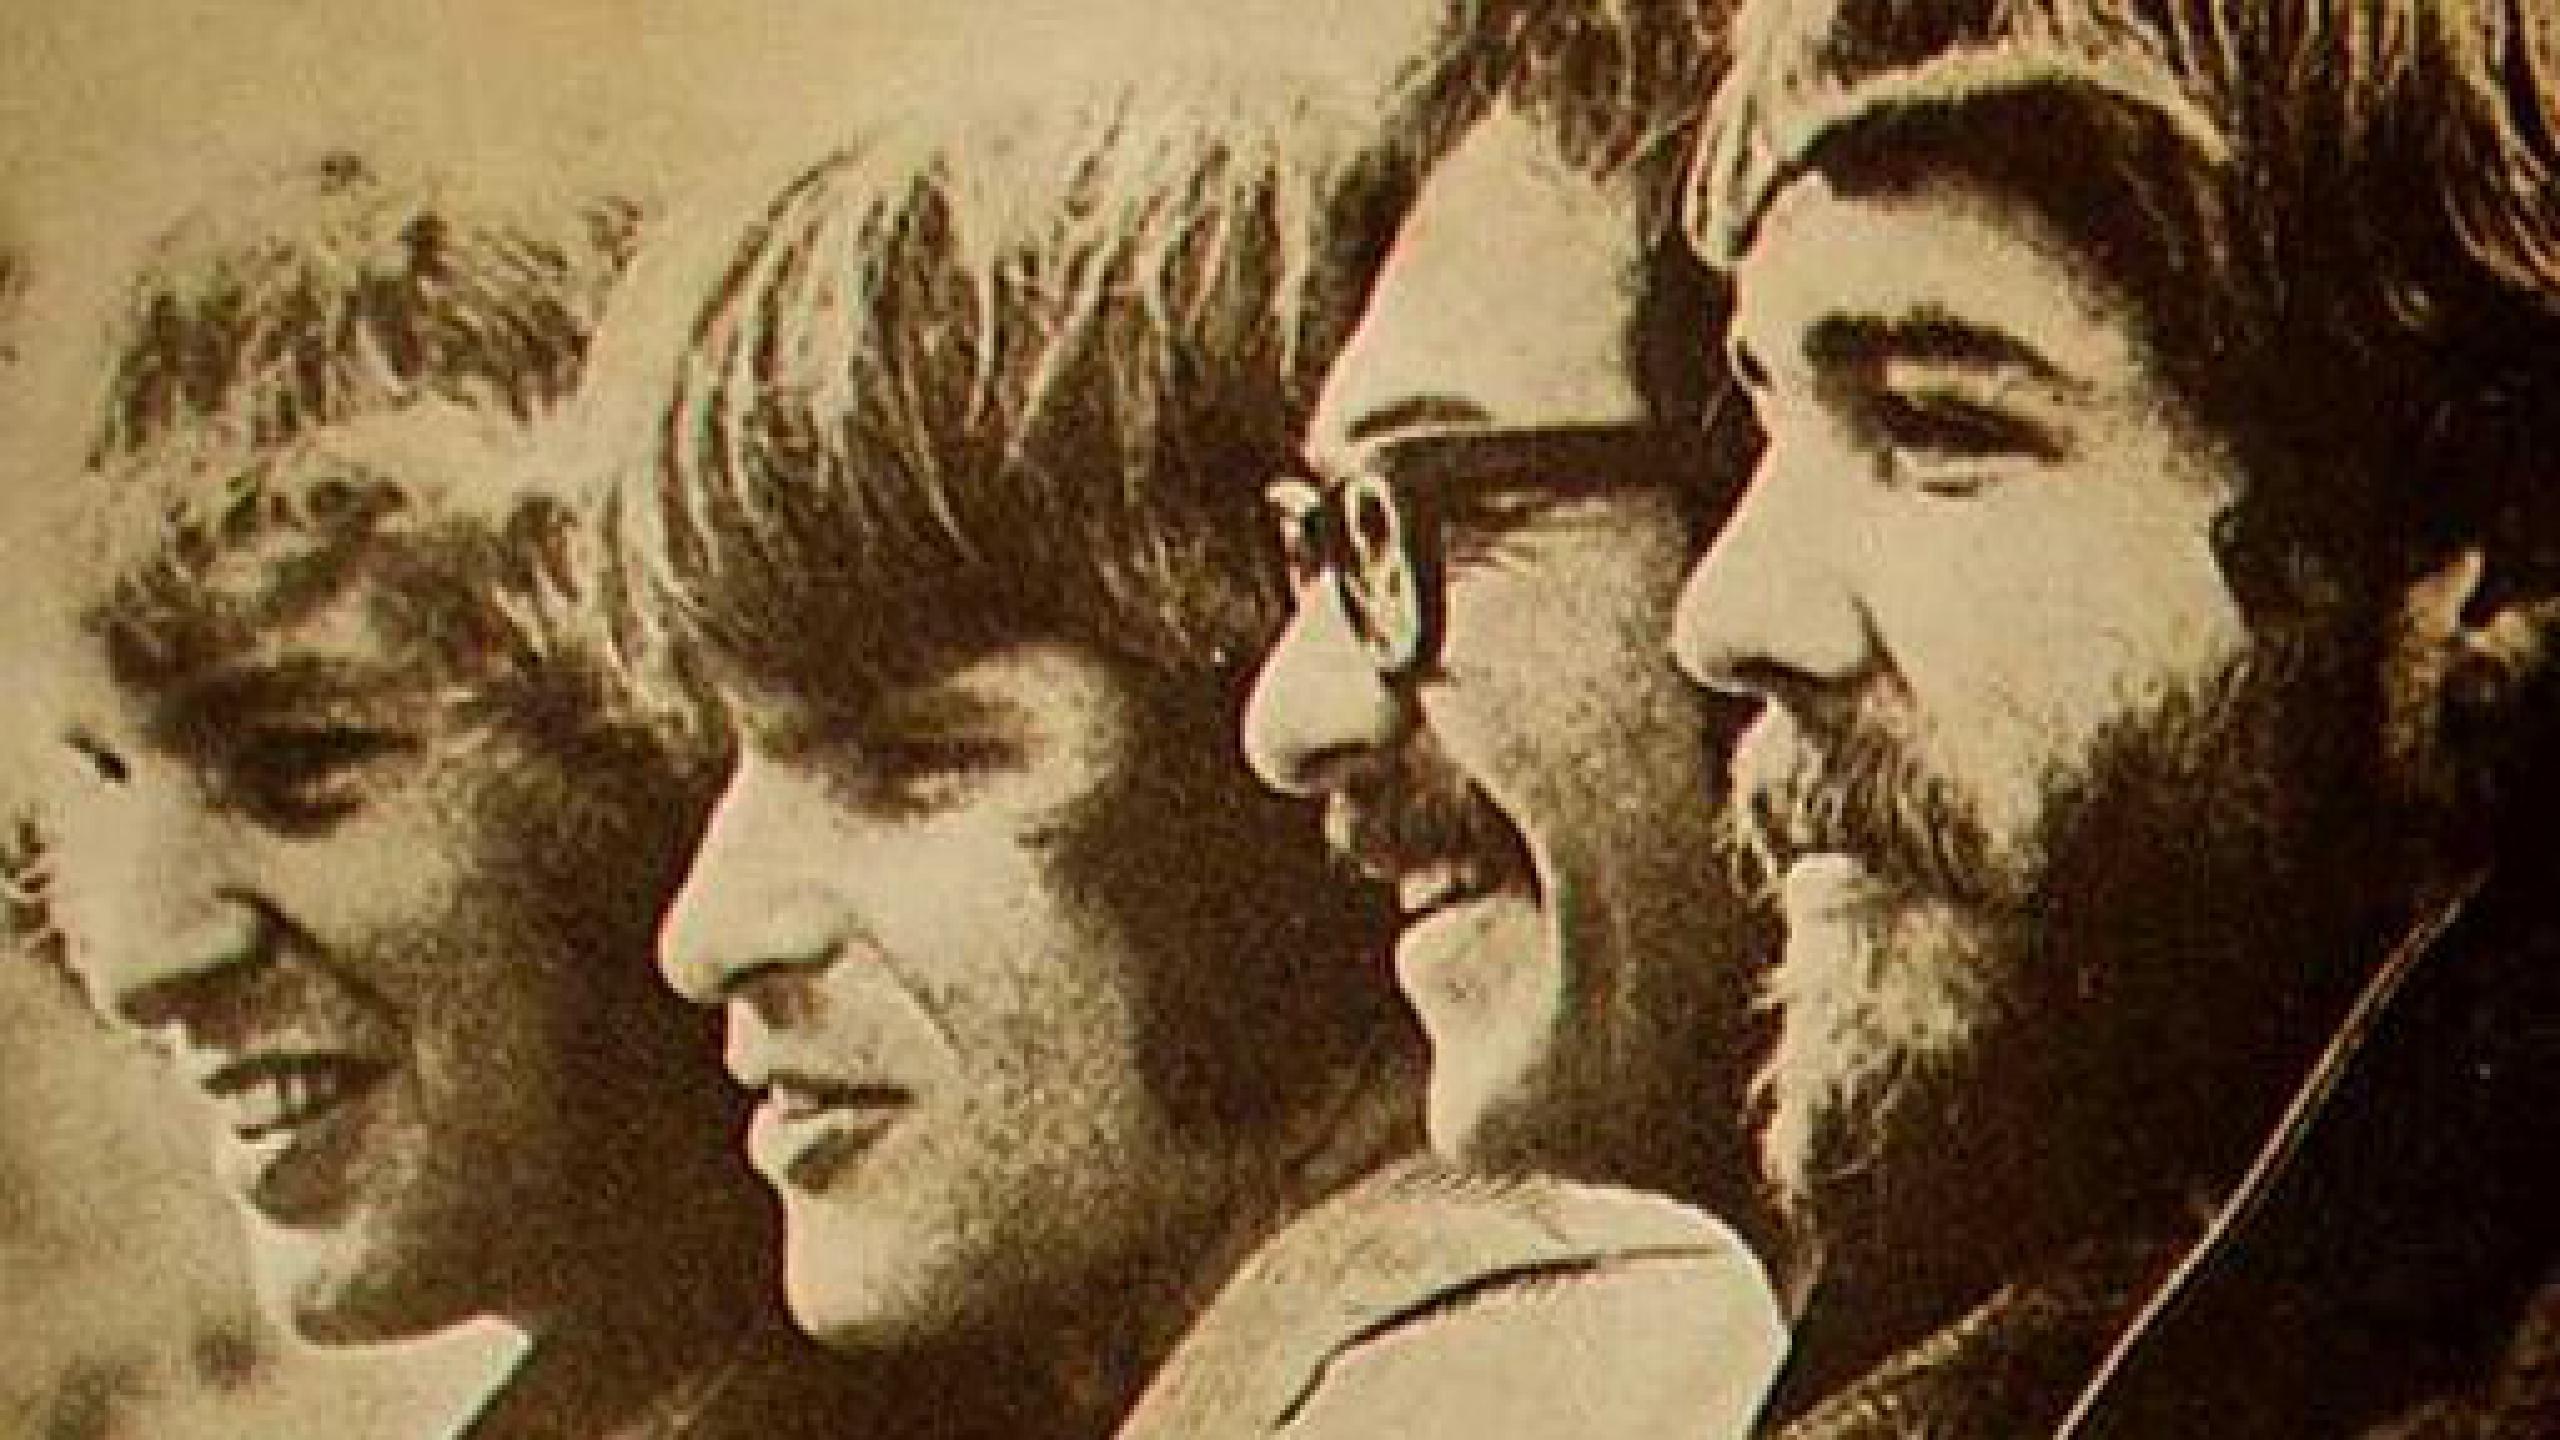 Creedence Clearwater Revival tour dates 2017 2018. Creedence